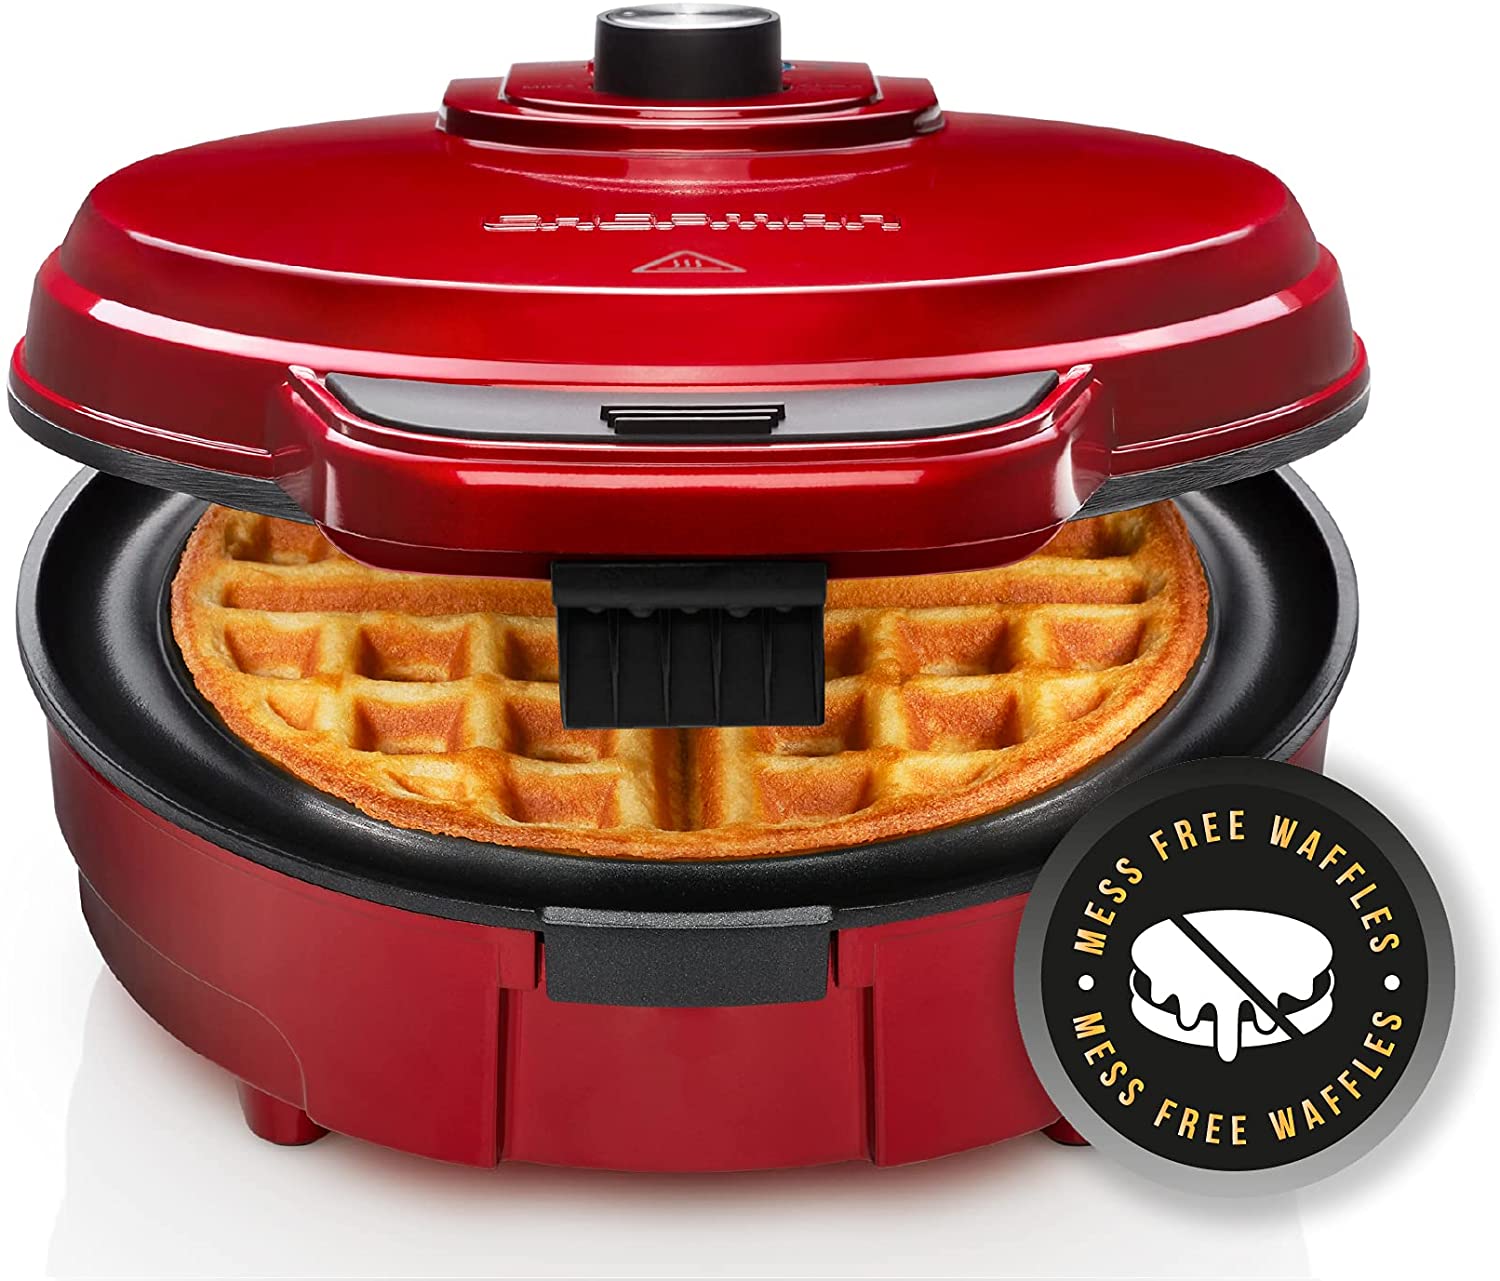 Chefman Anti-Overflow Belgian Waffle Maker (Red) $17 + Free Shipping w/ Prime